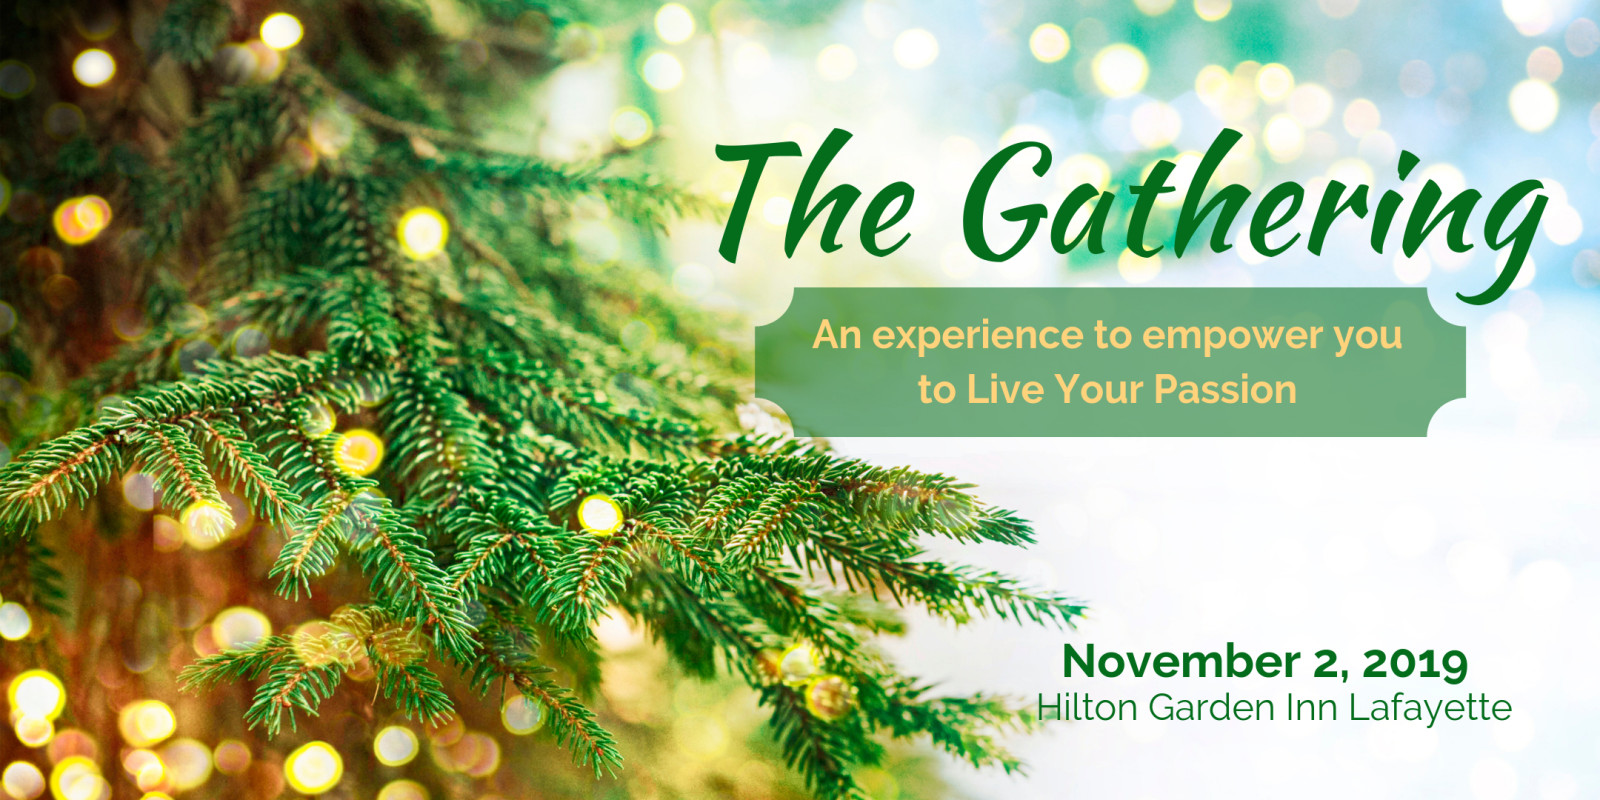 The Gathering - A Live Your Passion Event